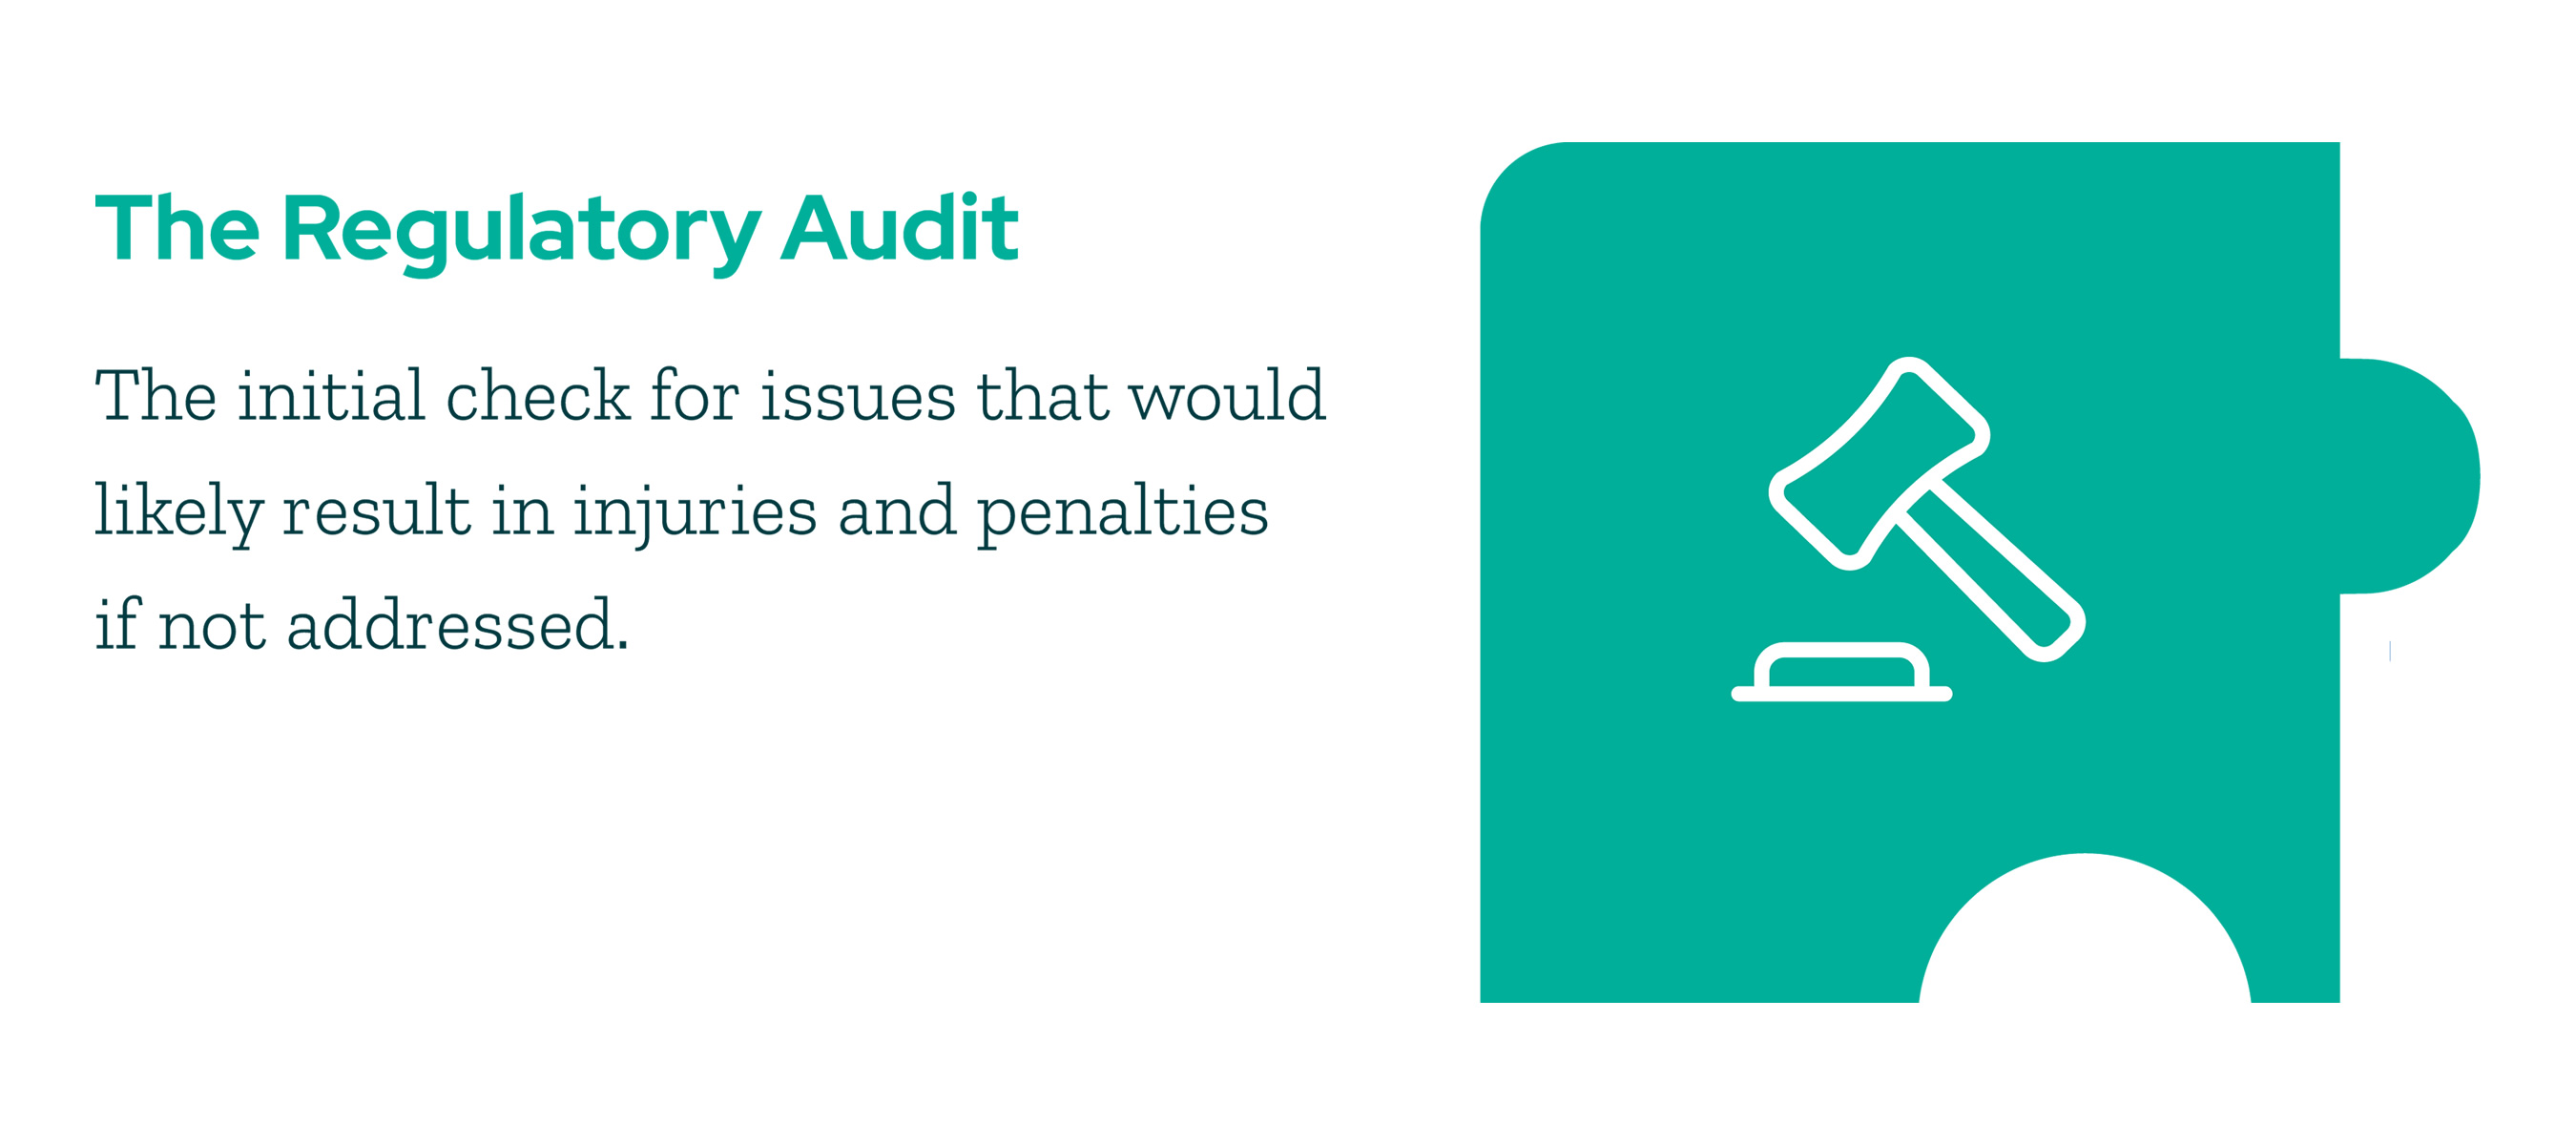 Regulatory Audit - The initial check for issues that would likely result in injuries and penalties if not addressed